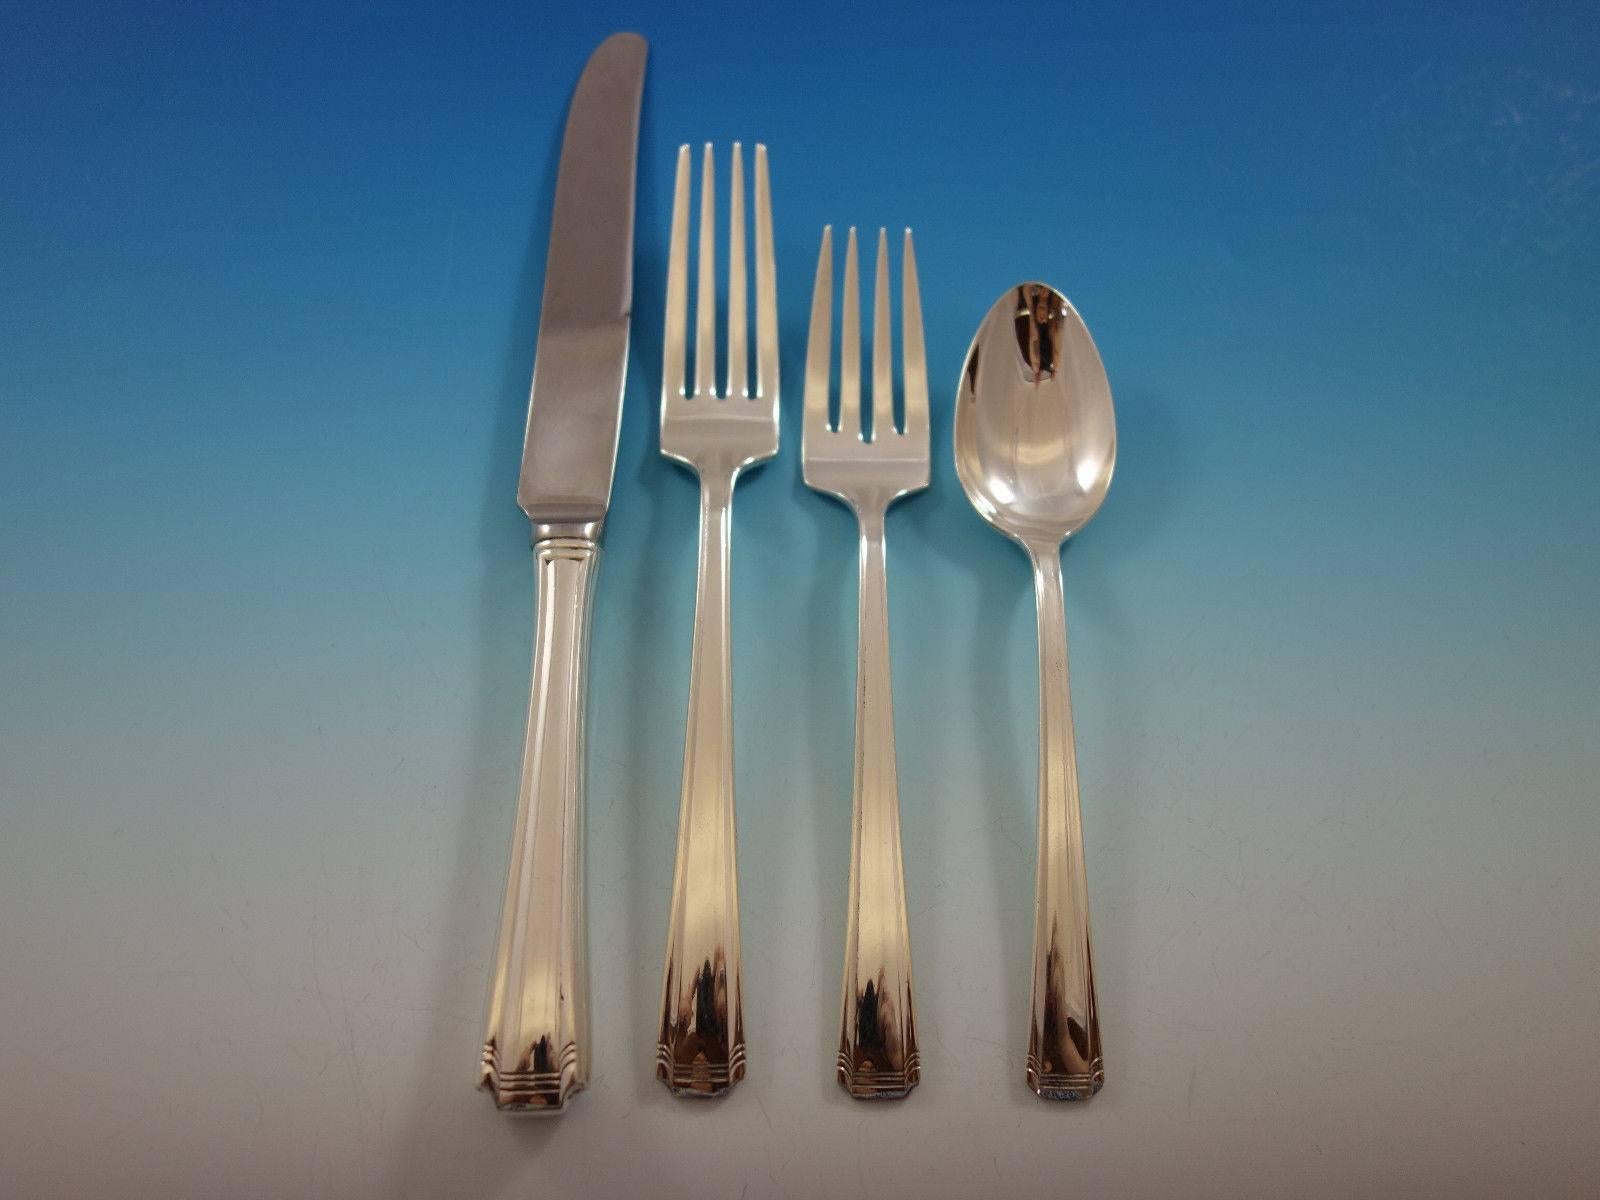 John and Priscilla by Westmorland sterling silver flatware set, 27 pieces. Great starter set! This set includes: 

Six knives, 9